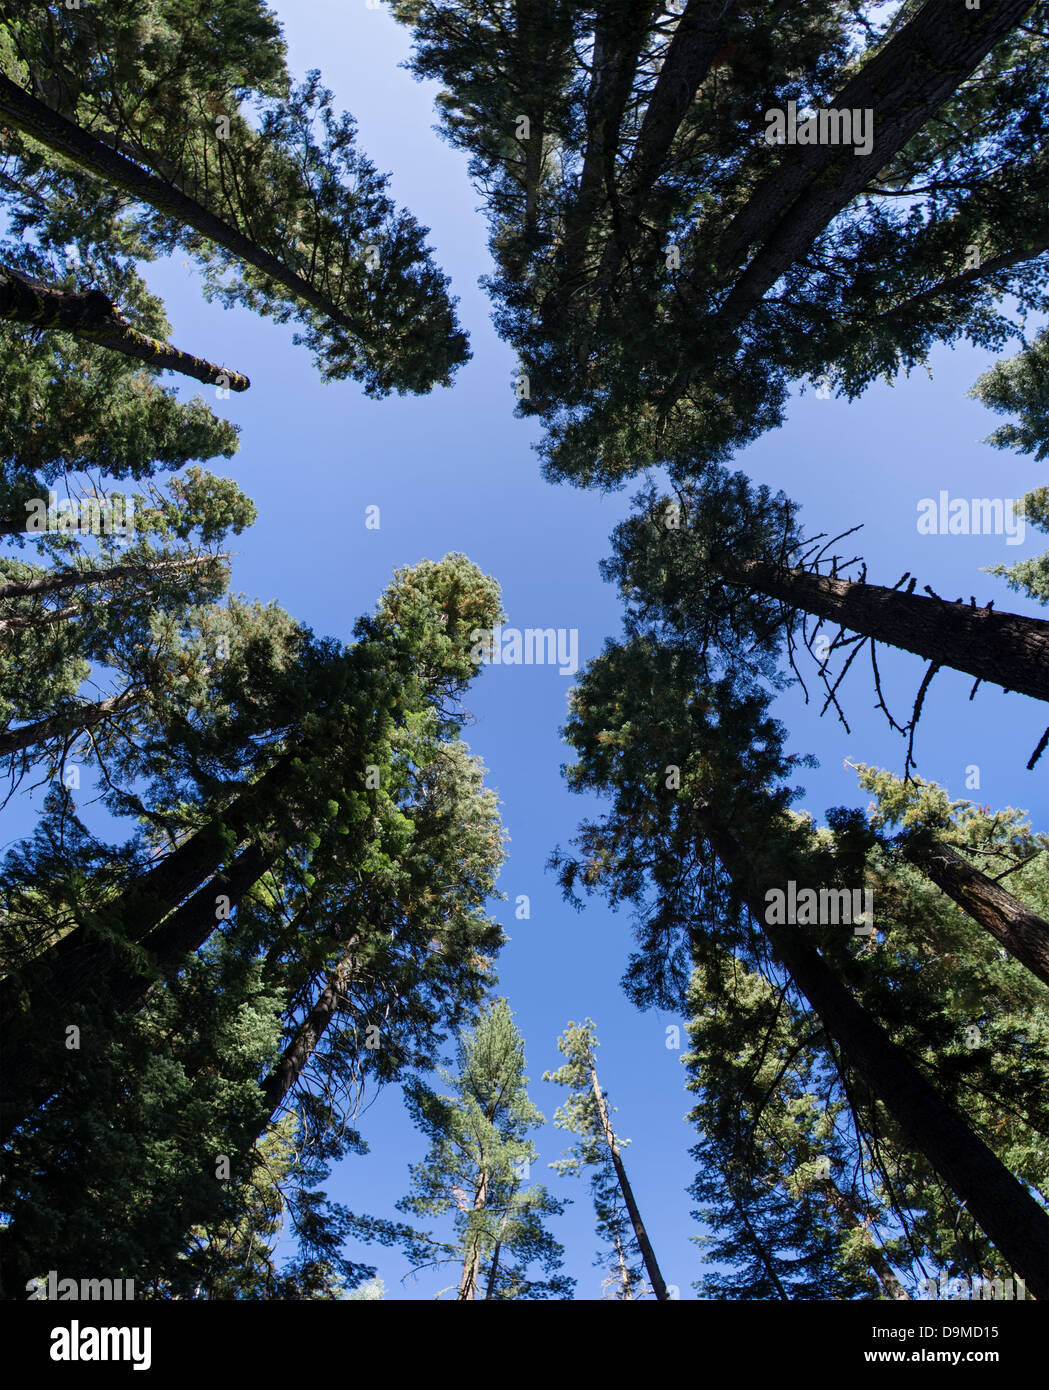 wide angle view up in an evergreen forest showing the perspective Stock Photo